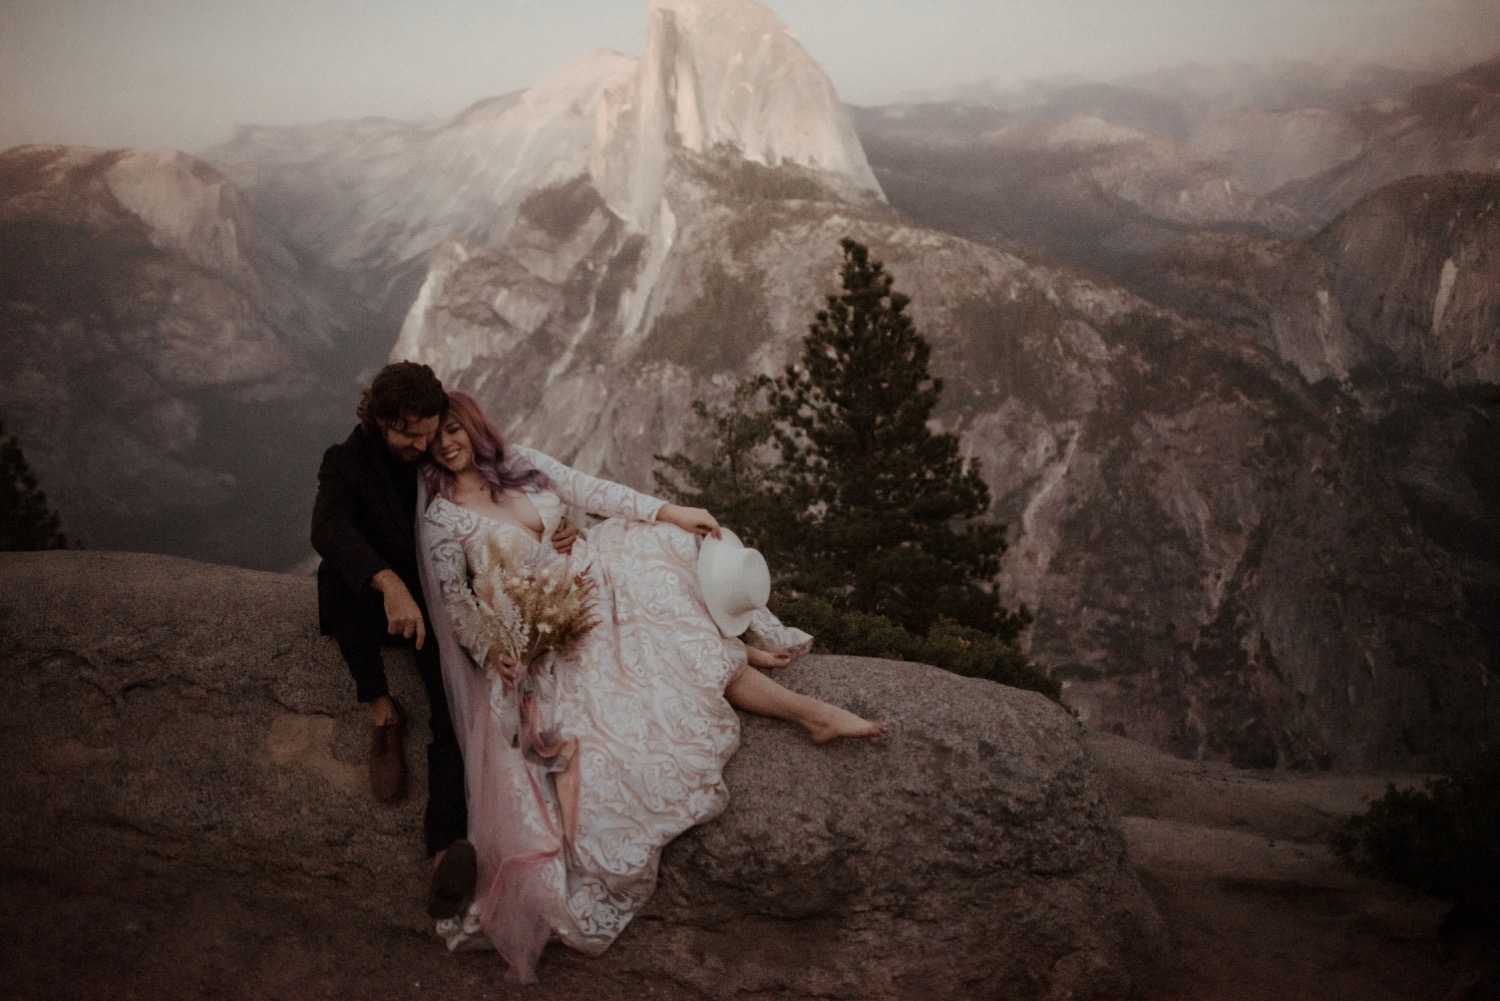 https://content1.getnarrativeapp.com/static/034e72ee-5809-4930-a3c2-8daa4d7e5fd5/bride-with-purple-hair-in-hat-and-pink-veil-eloping-at-Yosemite-National-Park.jpg?w=1500